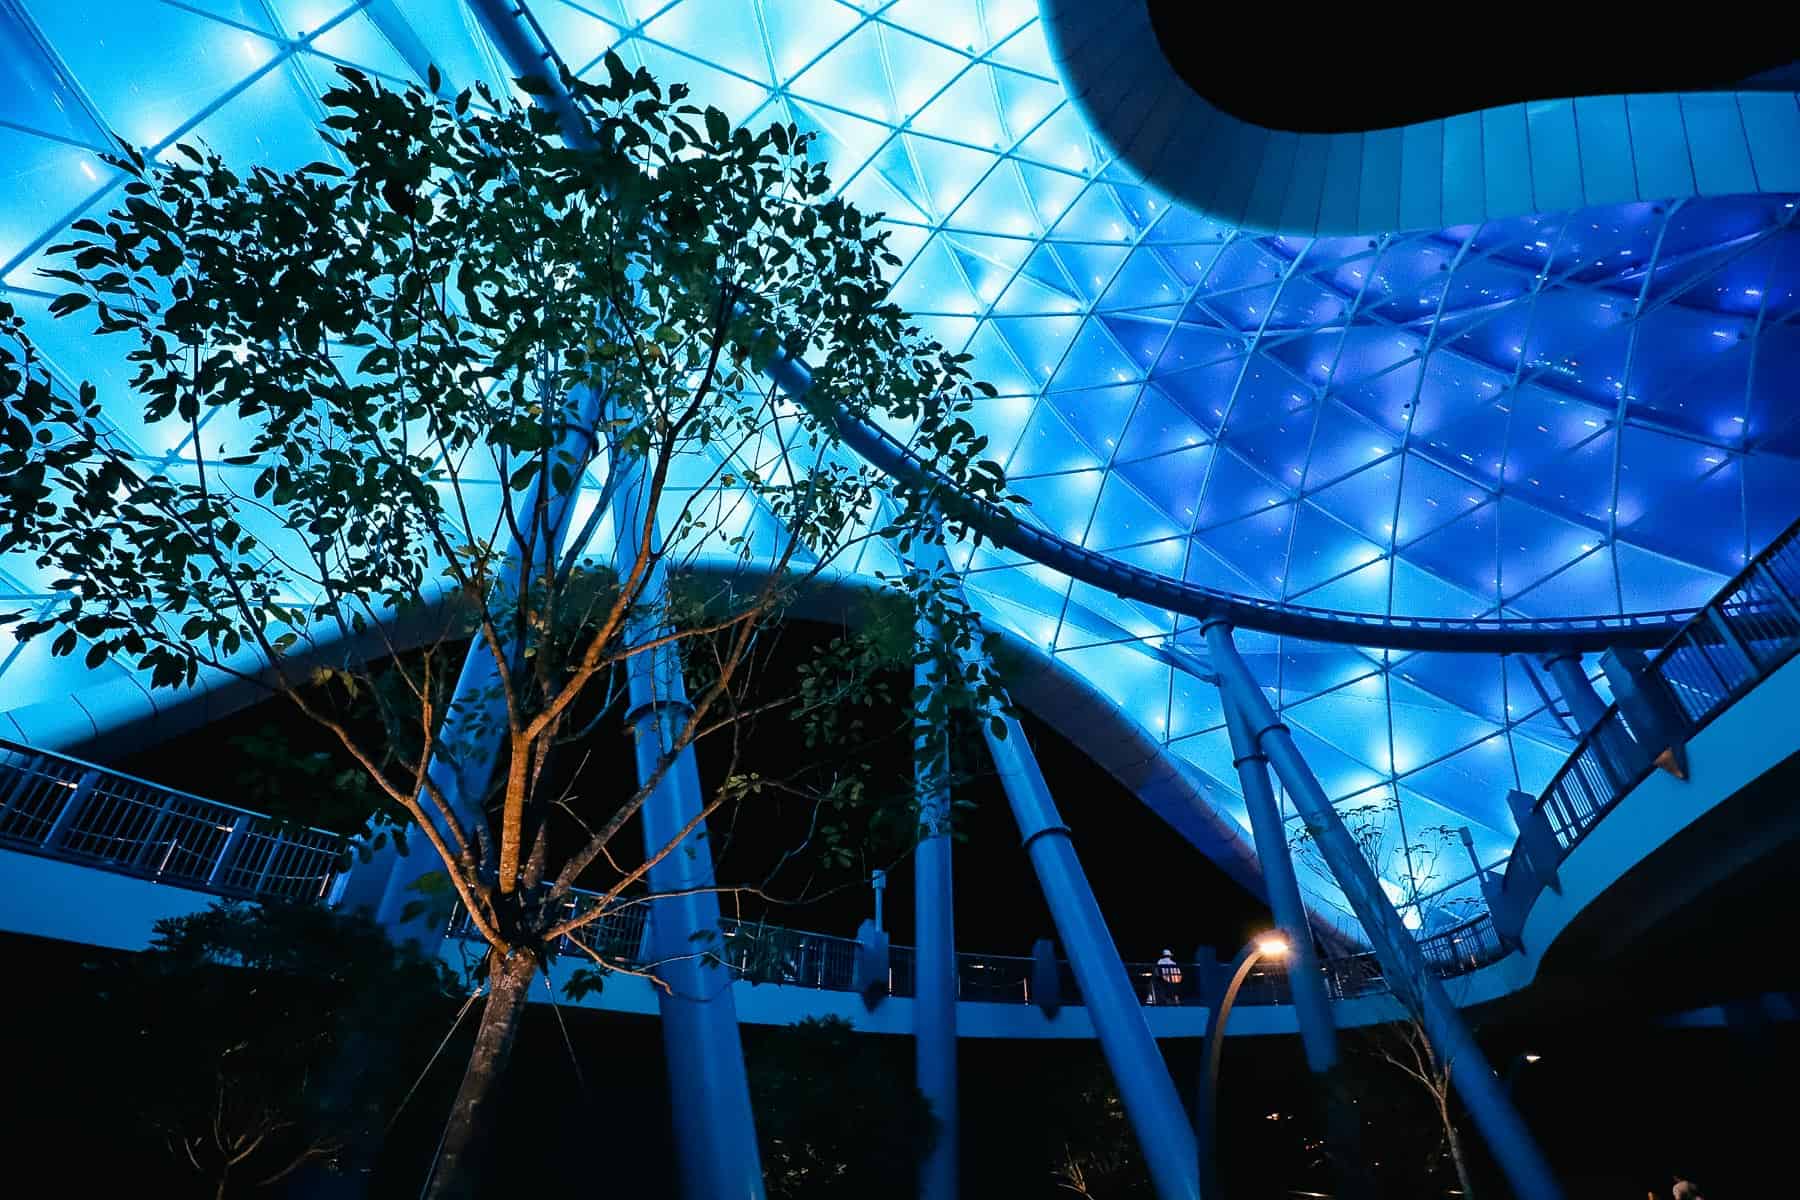 View of the Tron Canopy at night from the ground level. 